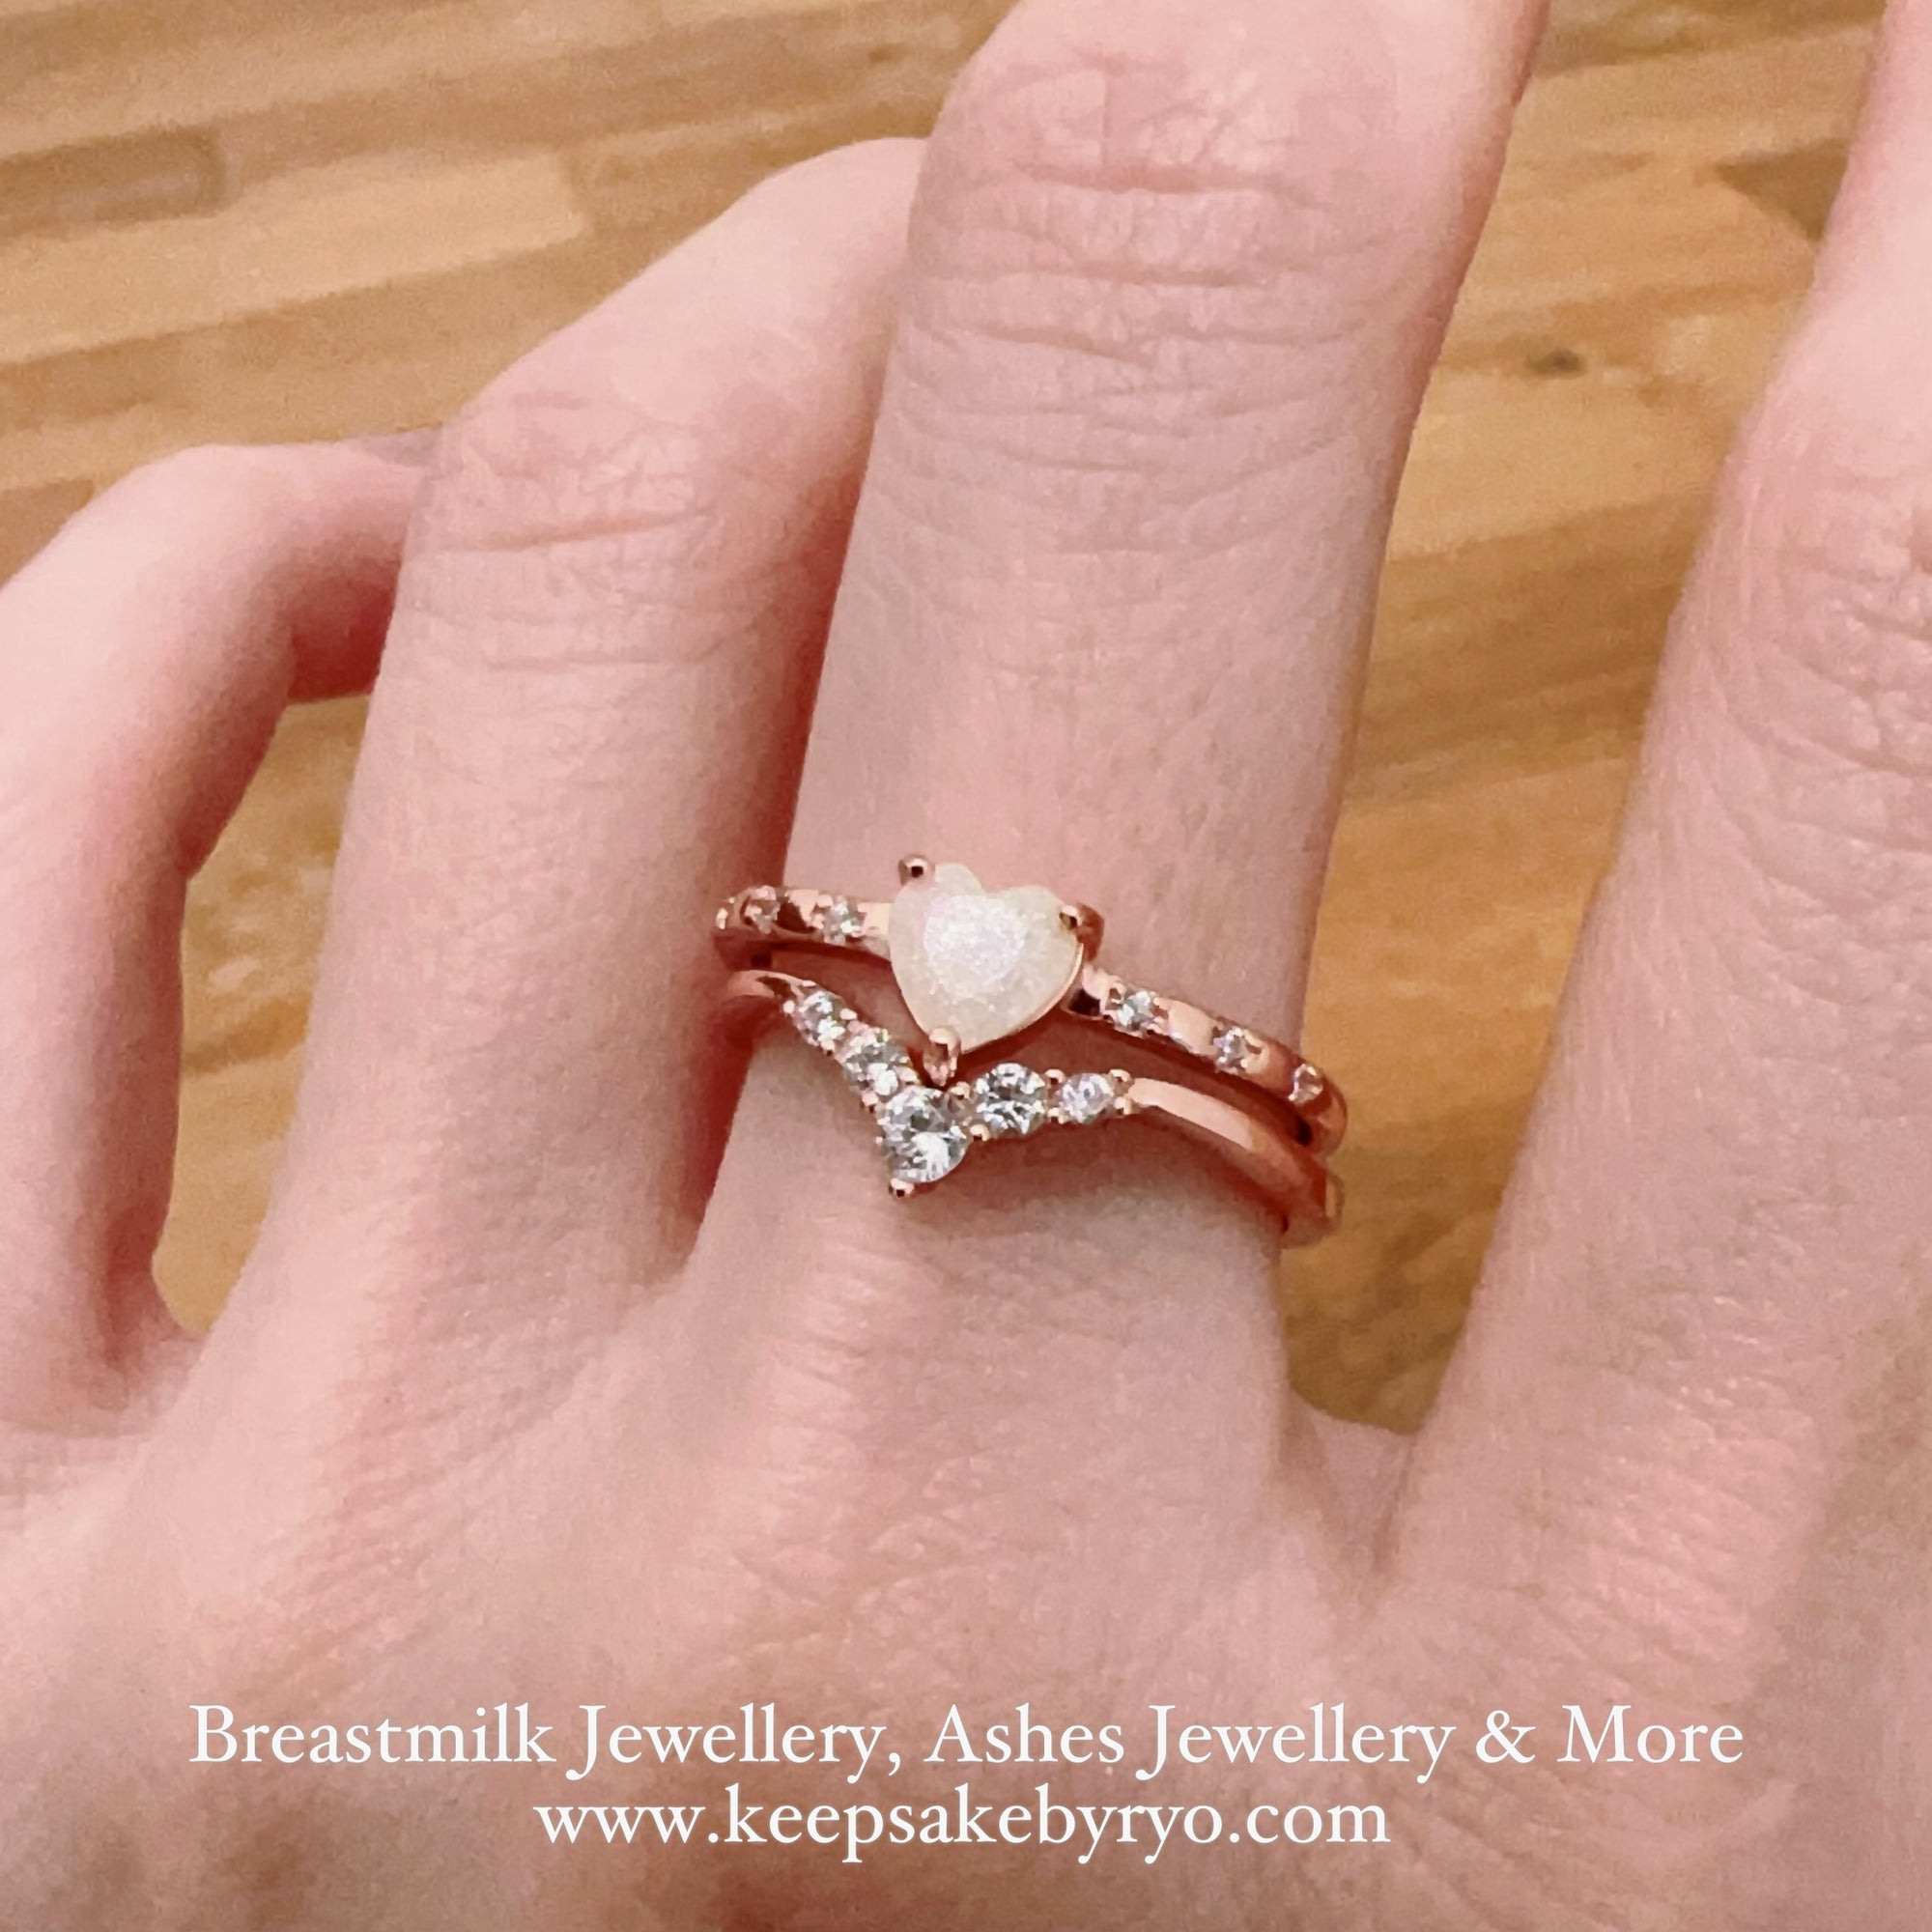 SOLITAIRE: PHOEBE STACKING DUO RINGS WITH HEART SHAPED SOLITAIRE